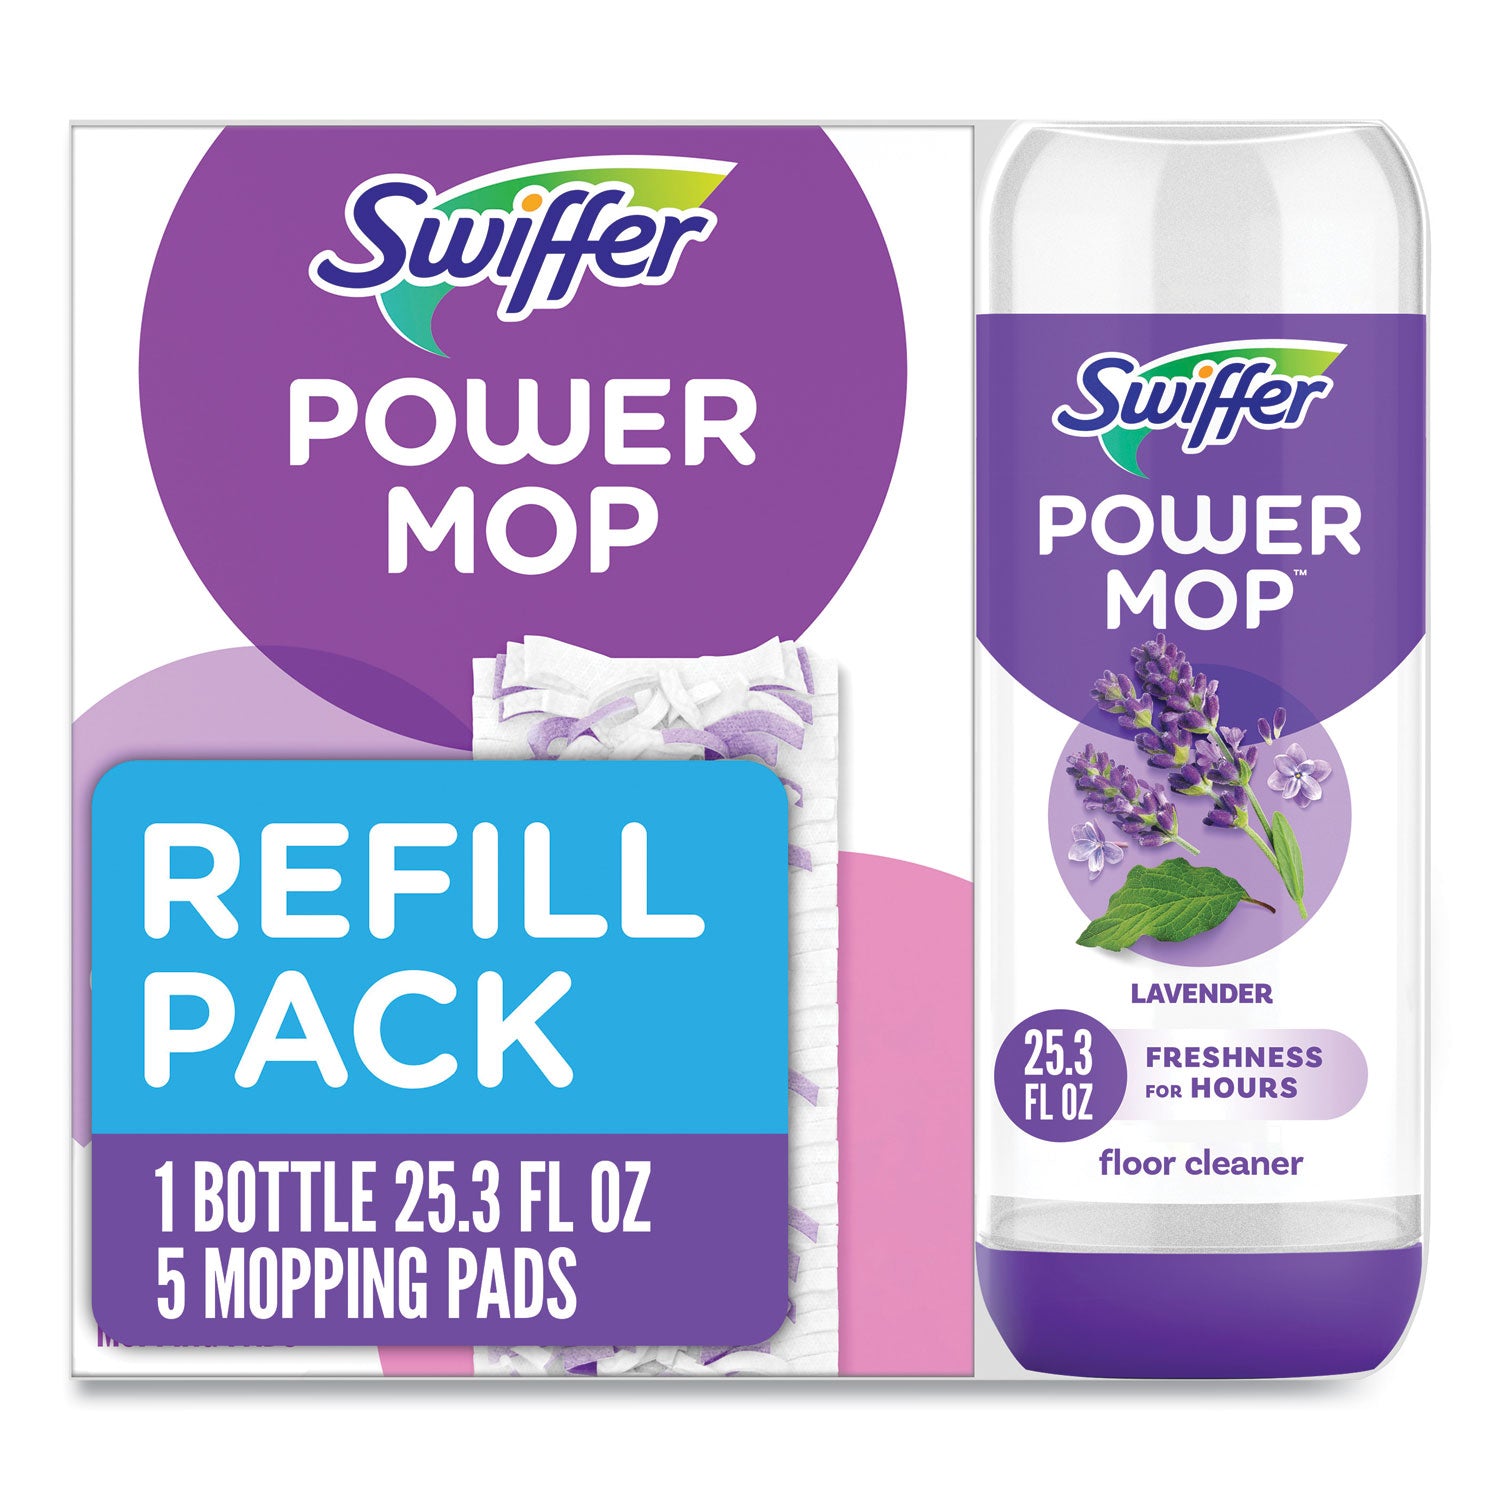 powermop-cleaning-solution-and-pads-refill-pack-lavender-253-oz-bottle-and-5-pads-per-pack-4-packs-carton_pgc09117 - 6